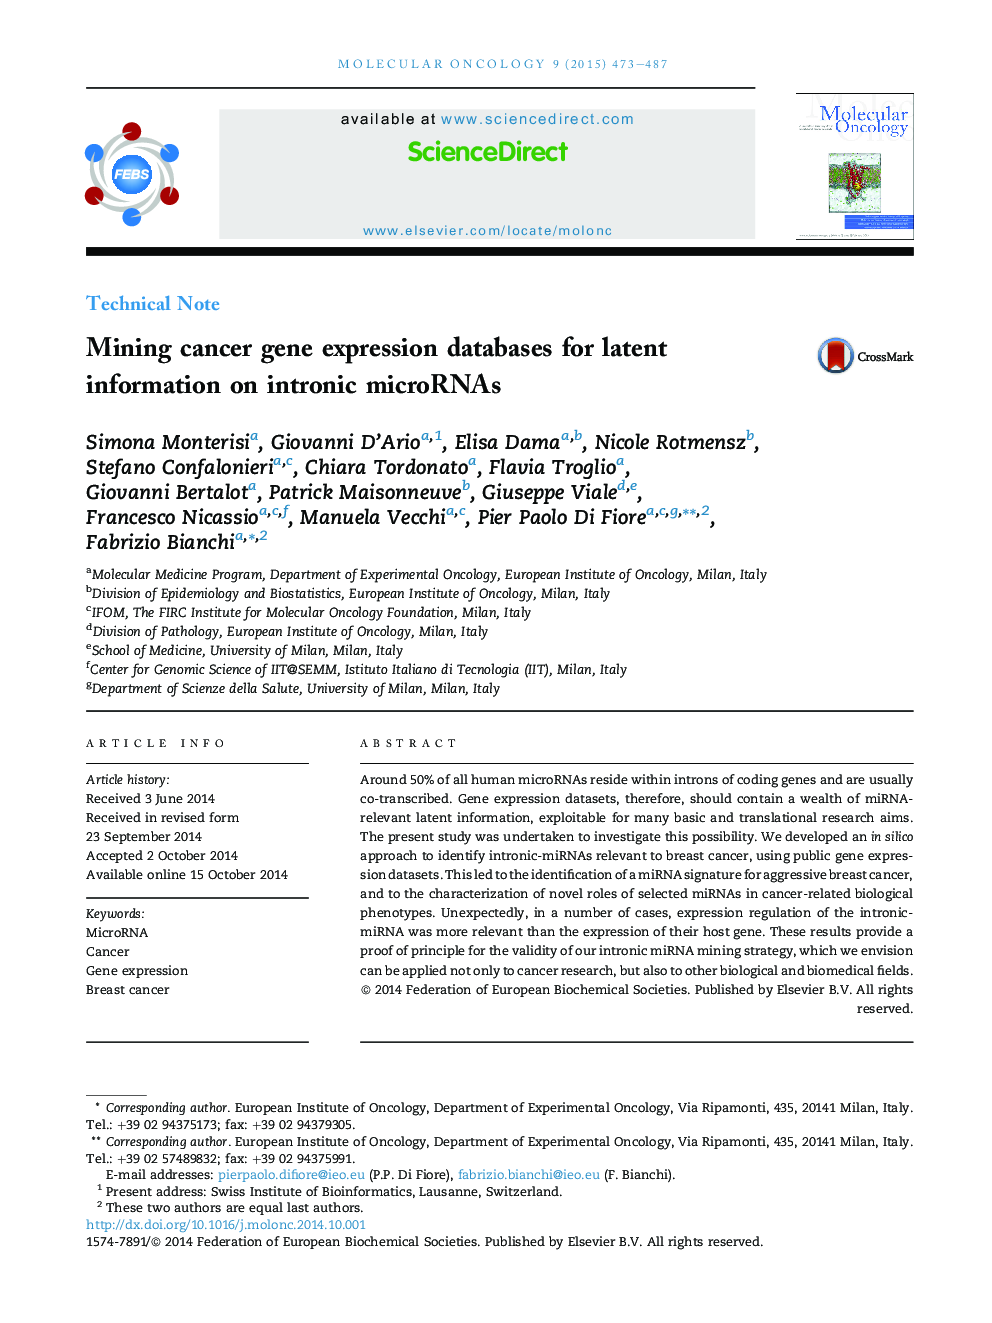 Mining cancer gene expression databases for latent information on intronic microRNAs